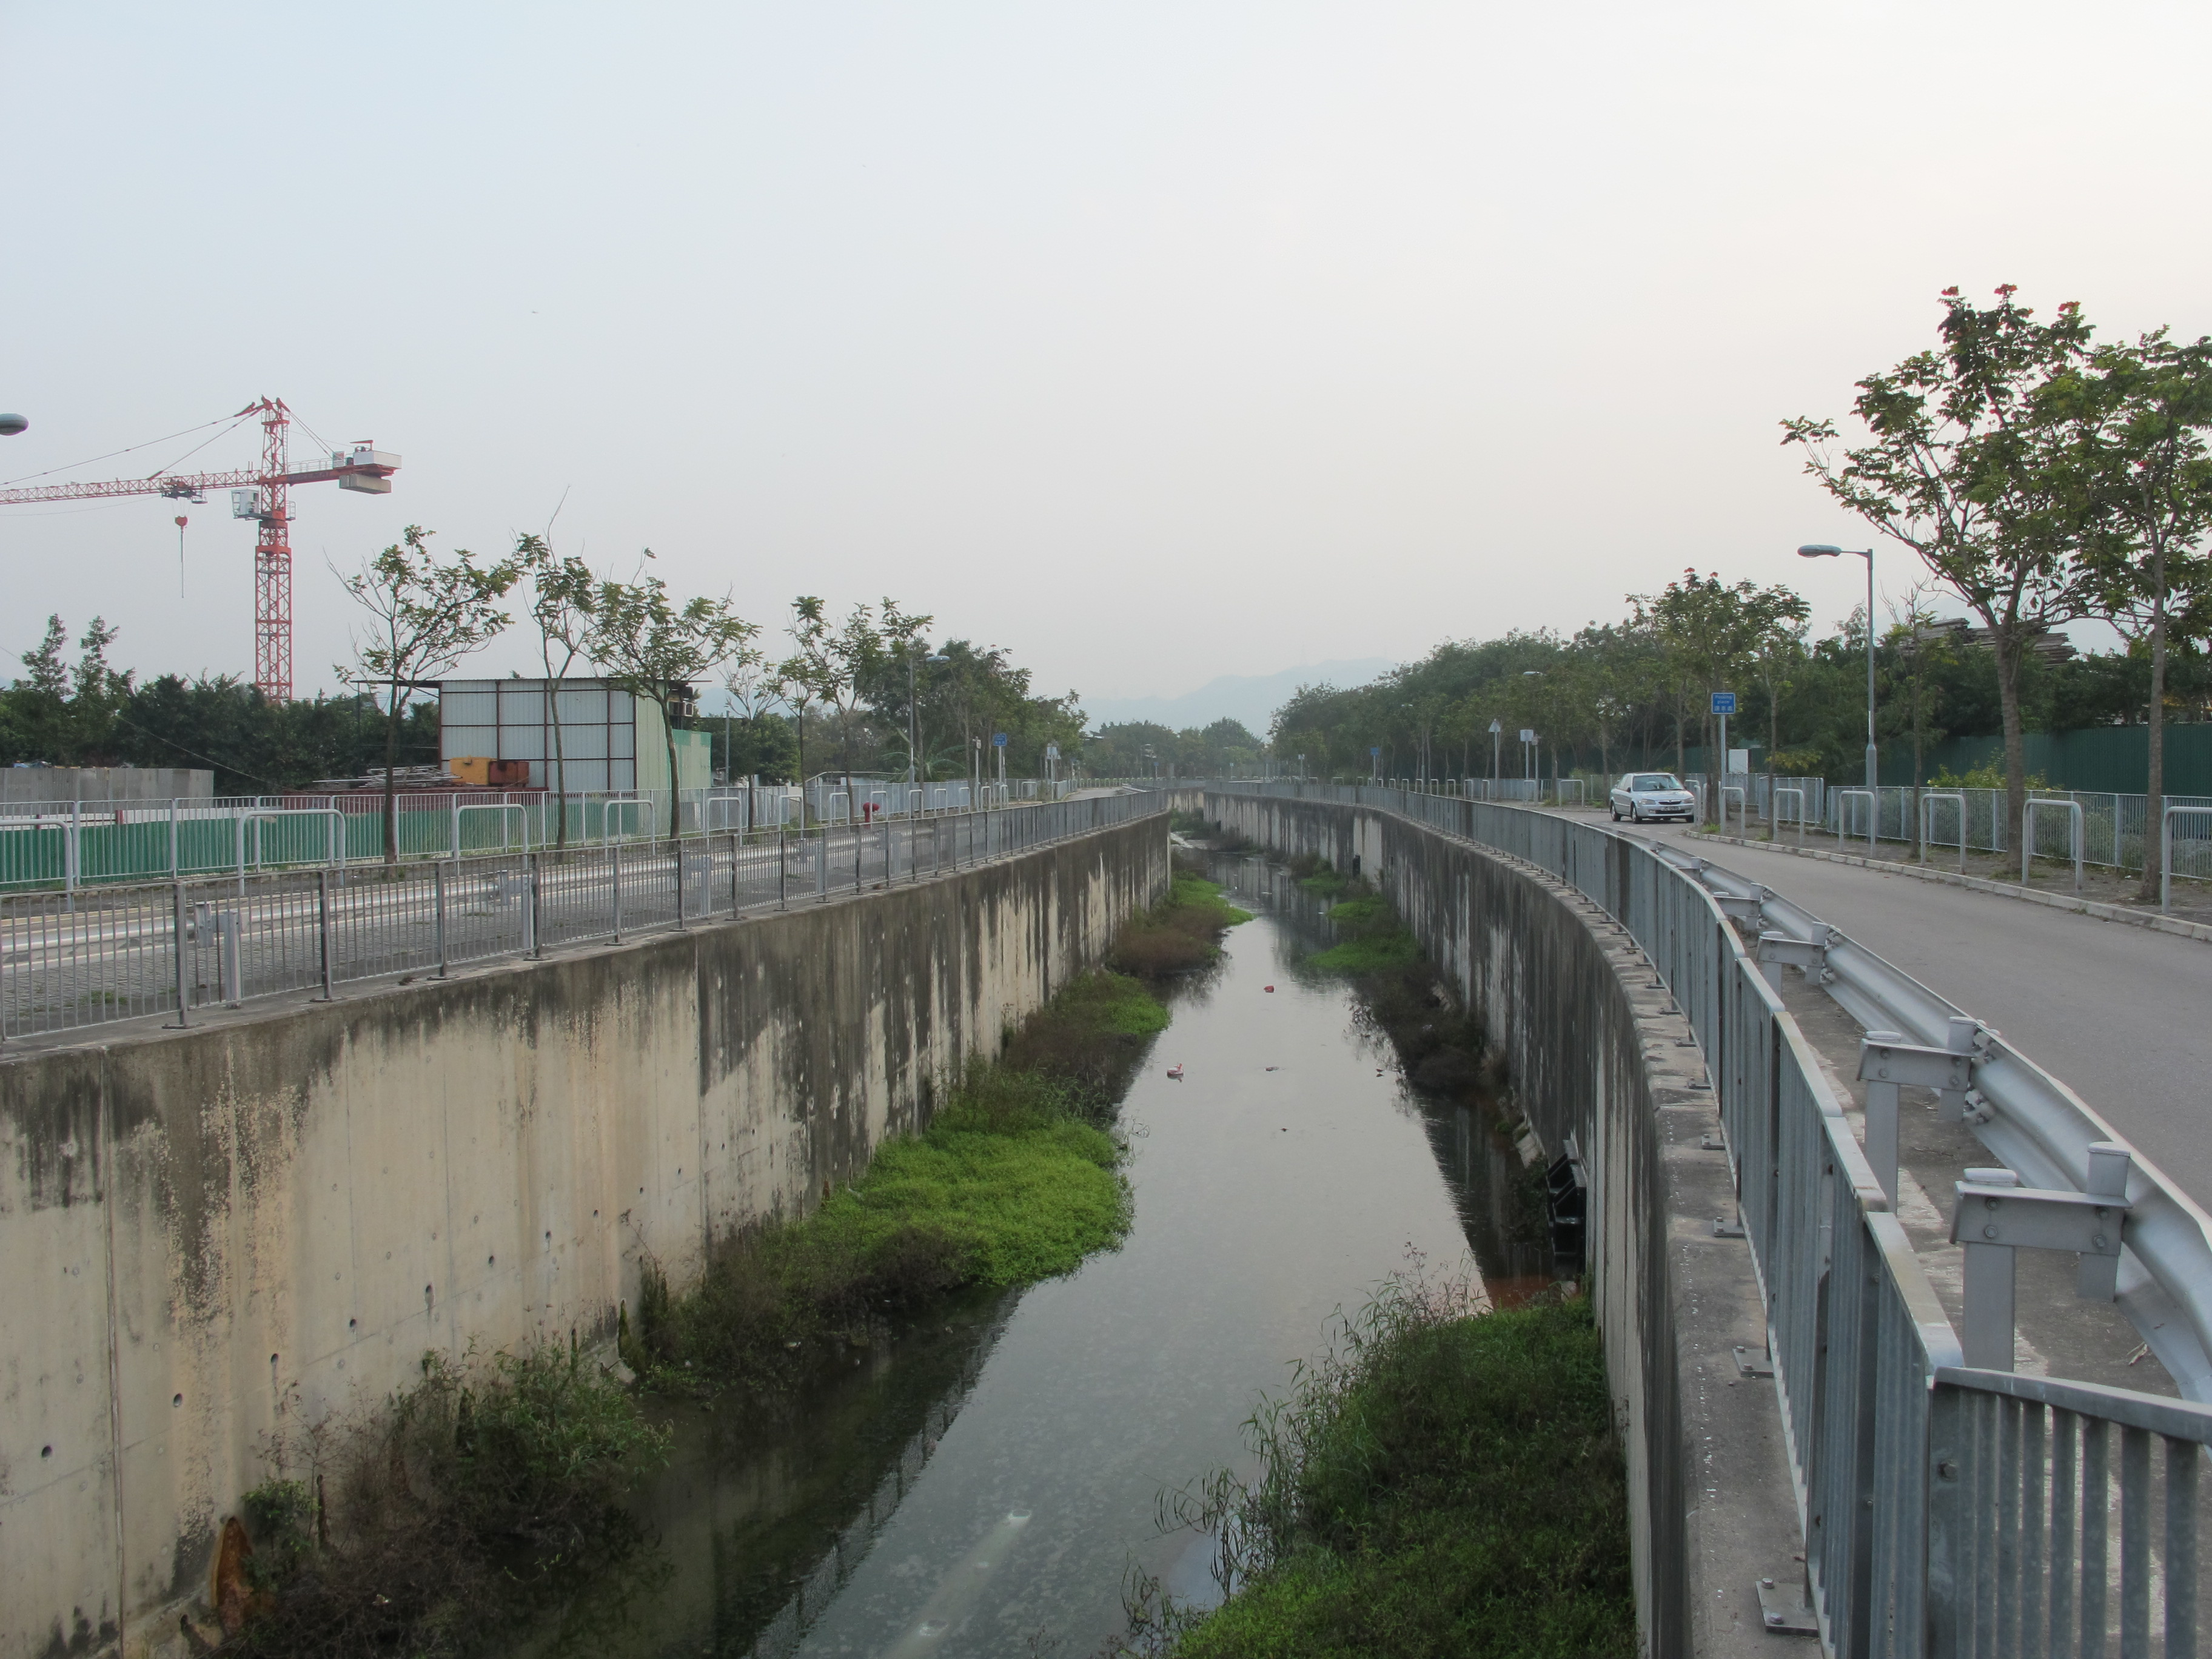 This is a picture showing Tin Tsuen Channel